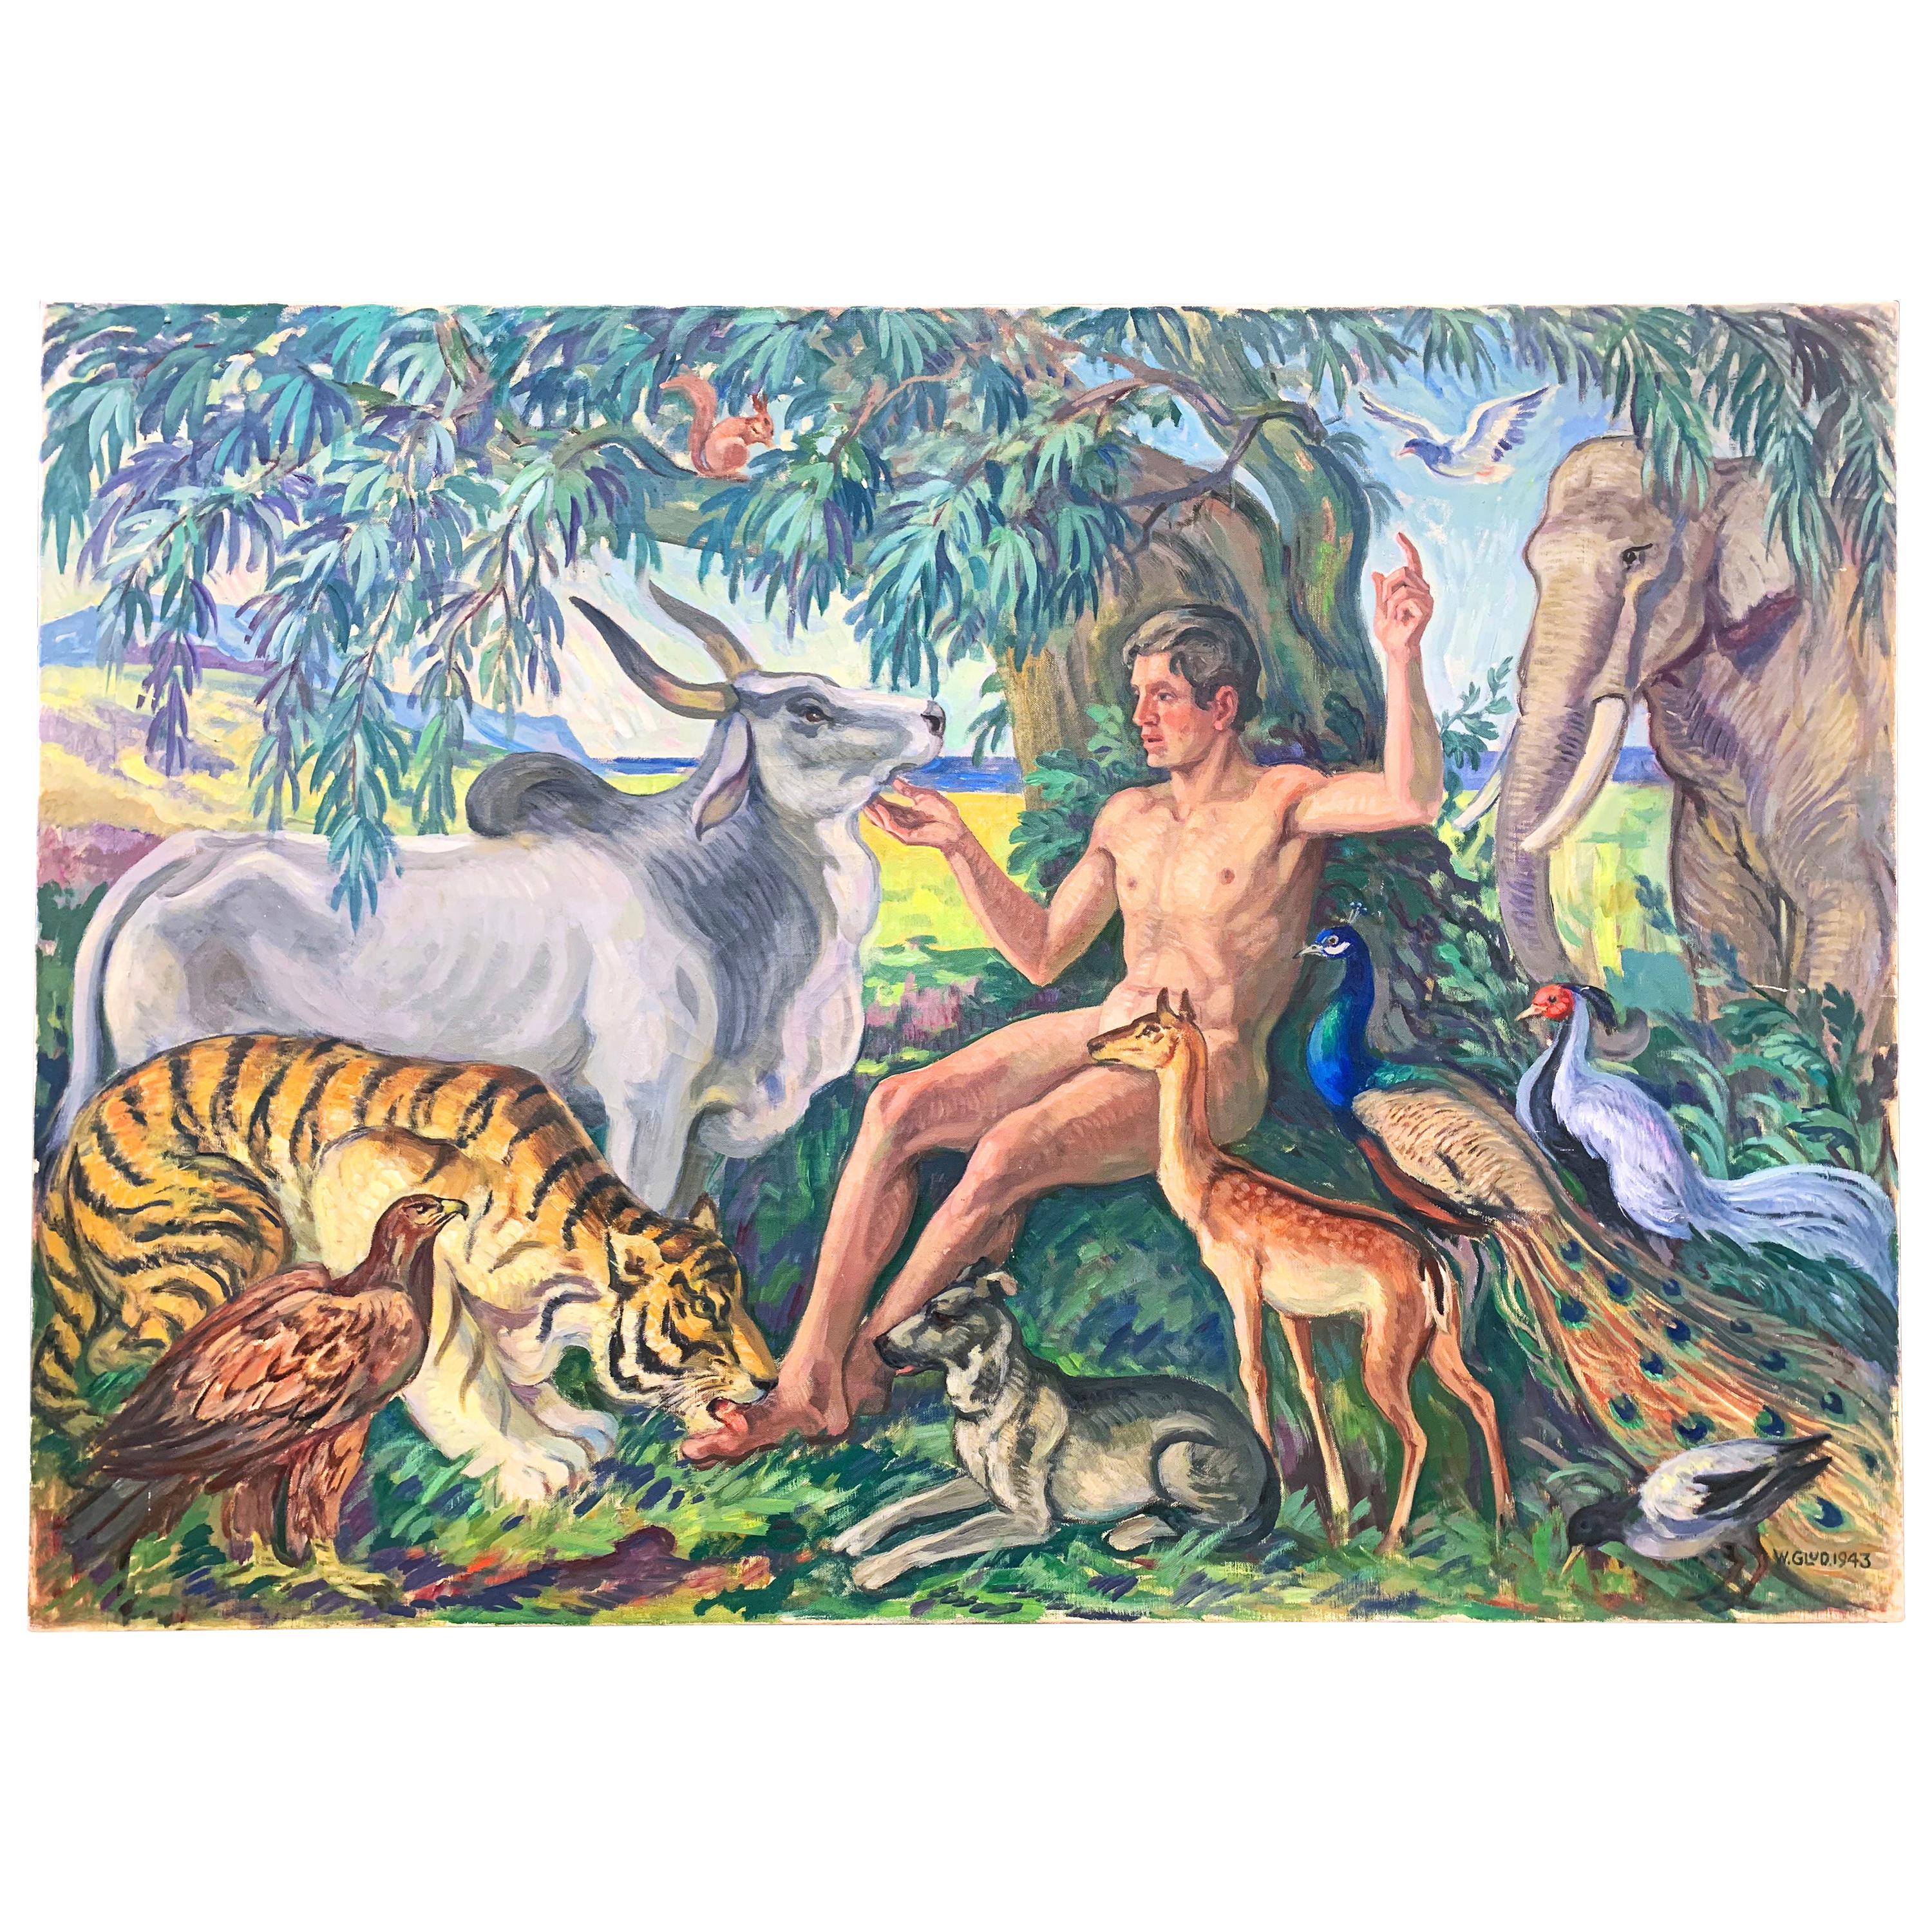 "Adam in Eden, " Monumental Depiction of Paradise in Wartime For Sale